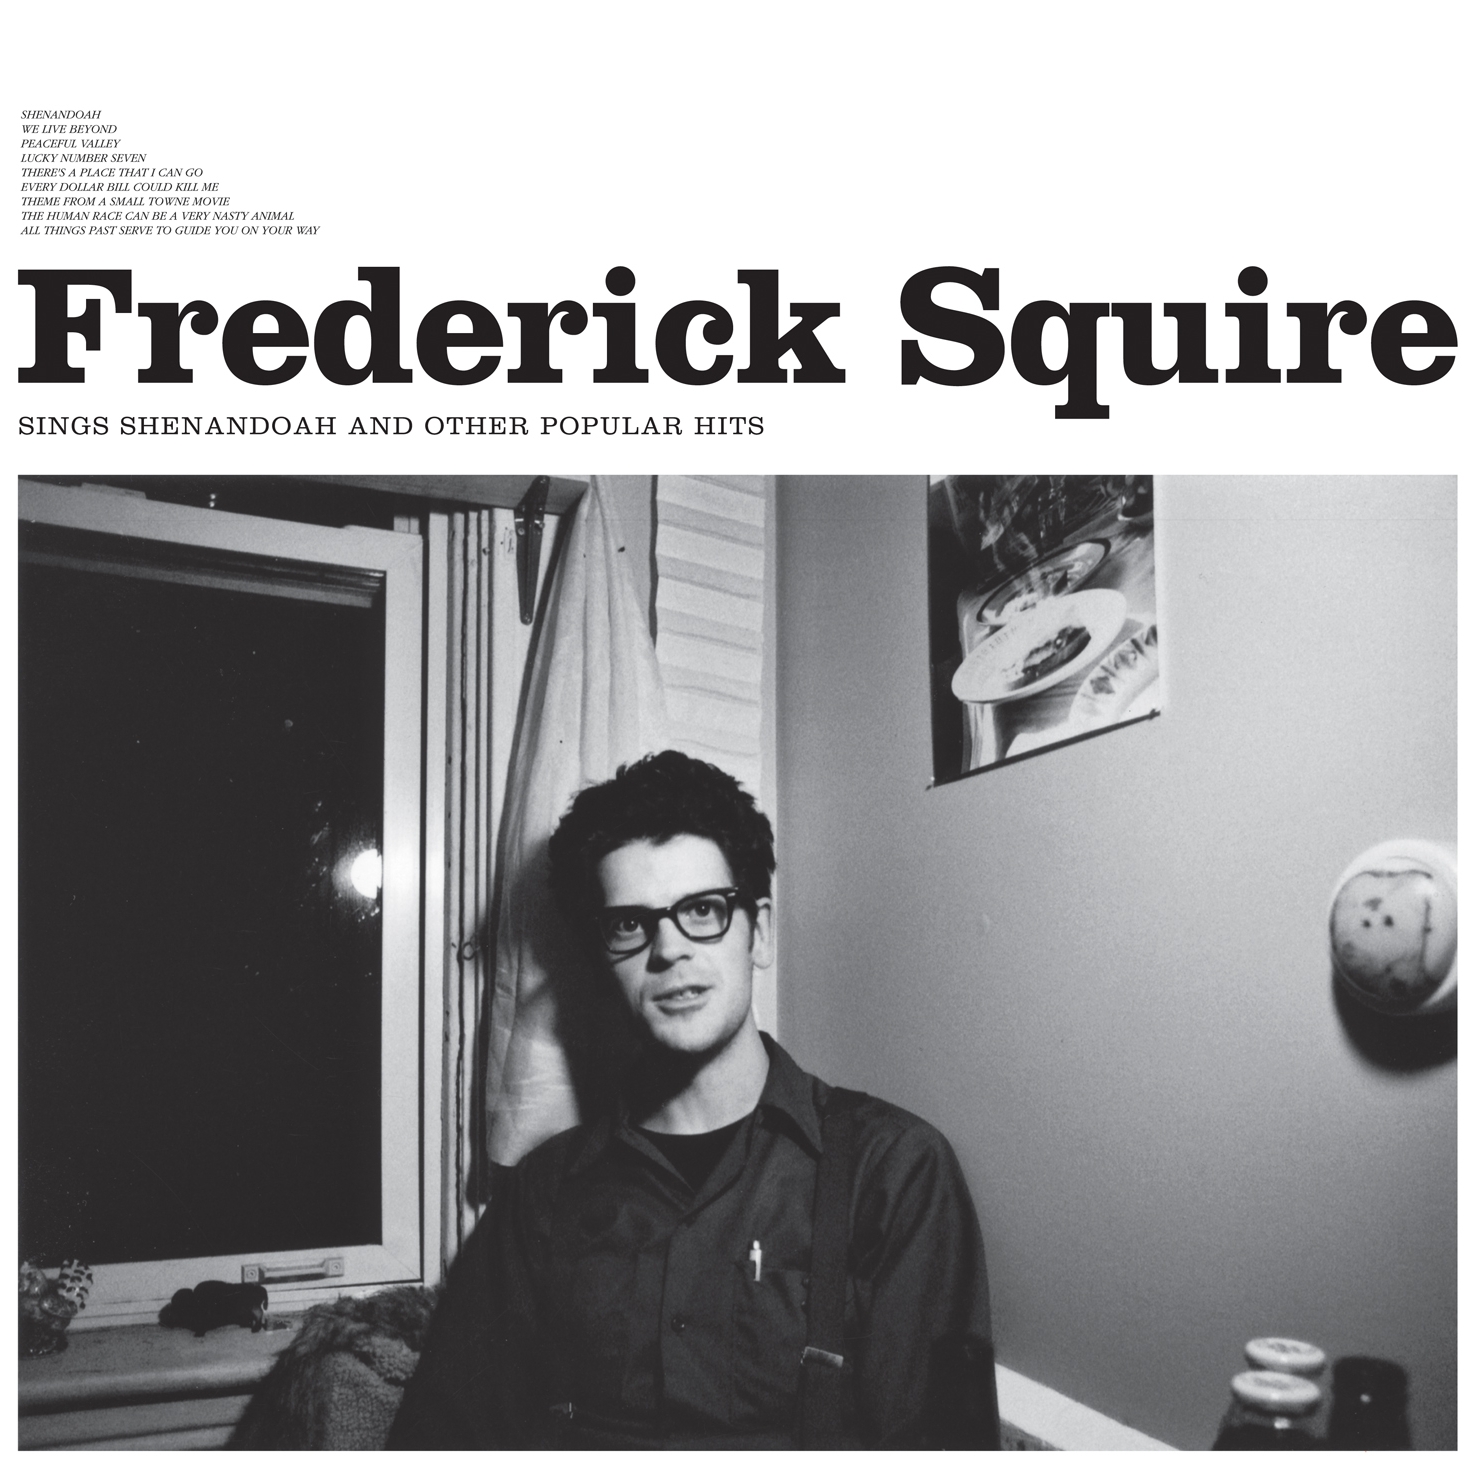 Frederick Squire Sings Shenandoah